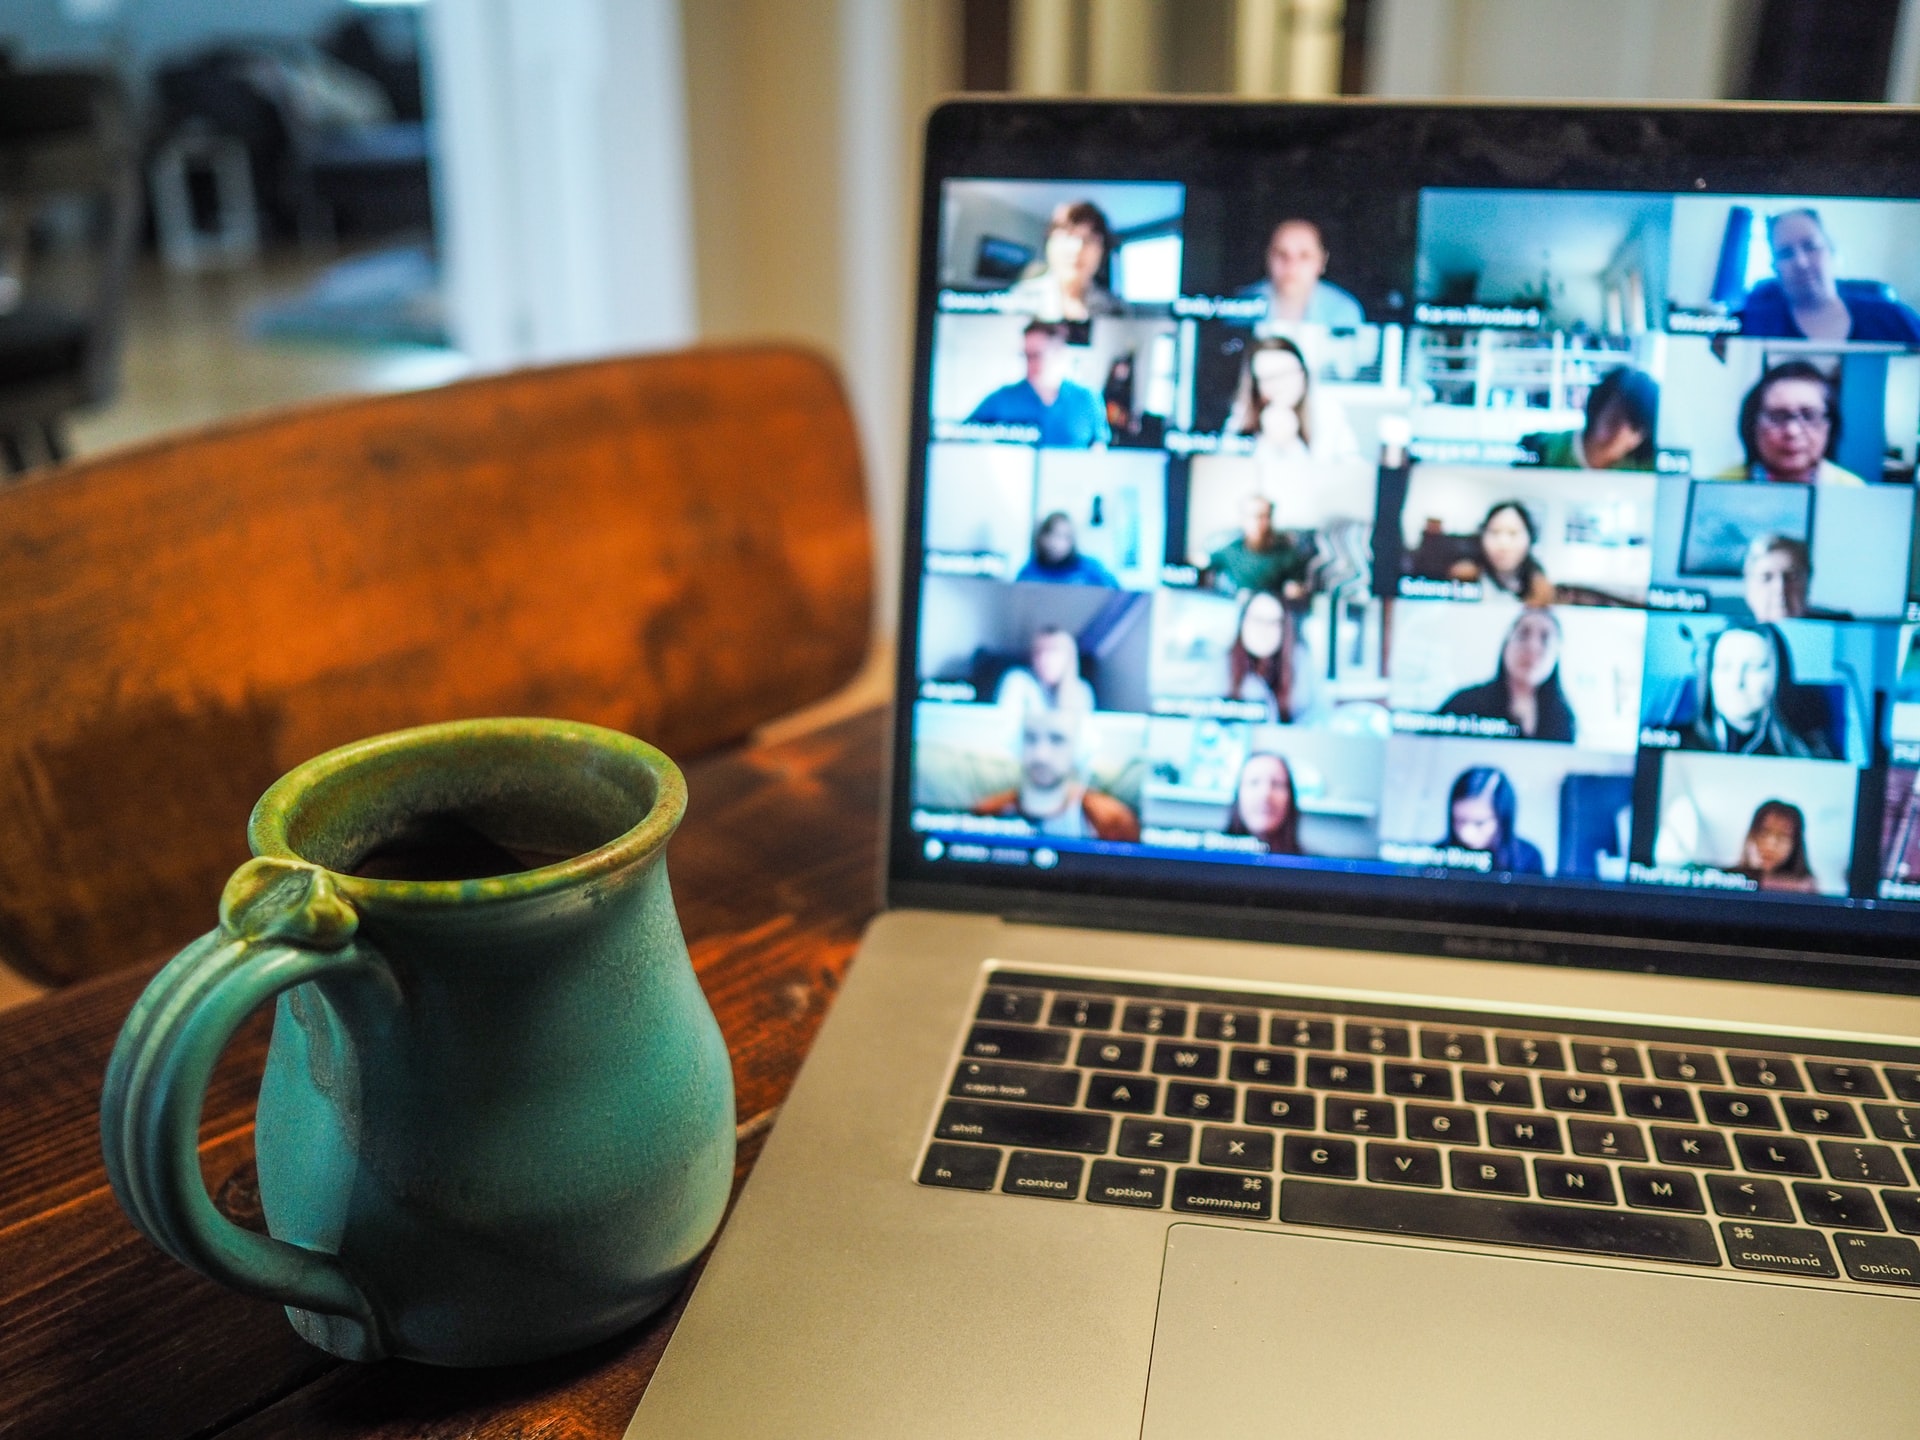 On a dark wooden table is blue mug & a laptop at an angle displaying the many faces of people attending a video teleconference meeting. | Photo: Chris Montgomery via Unsplash 